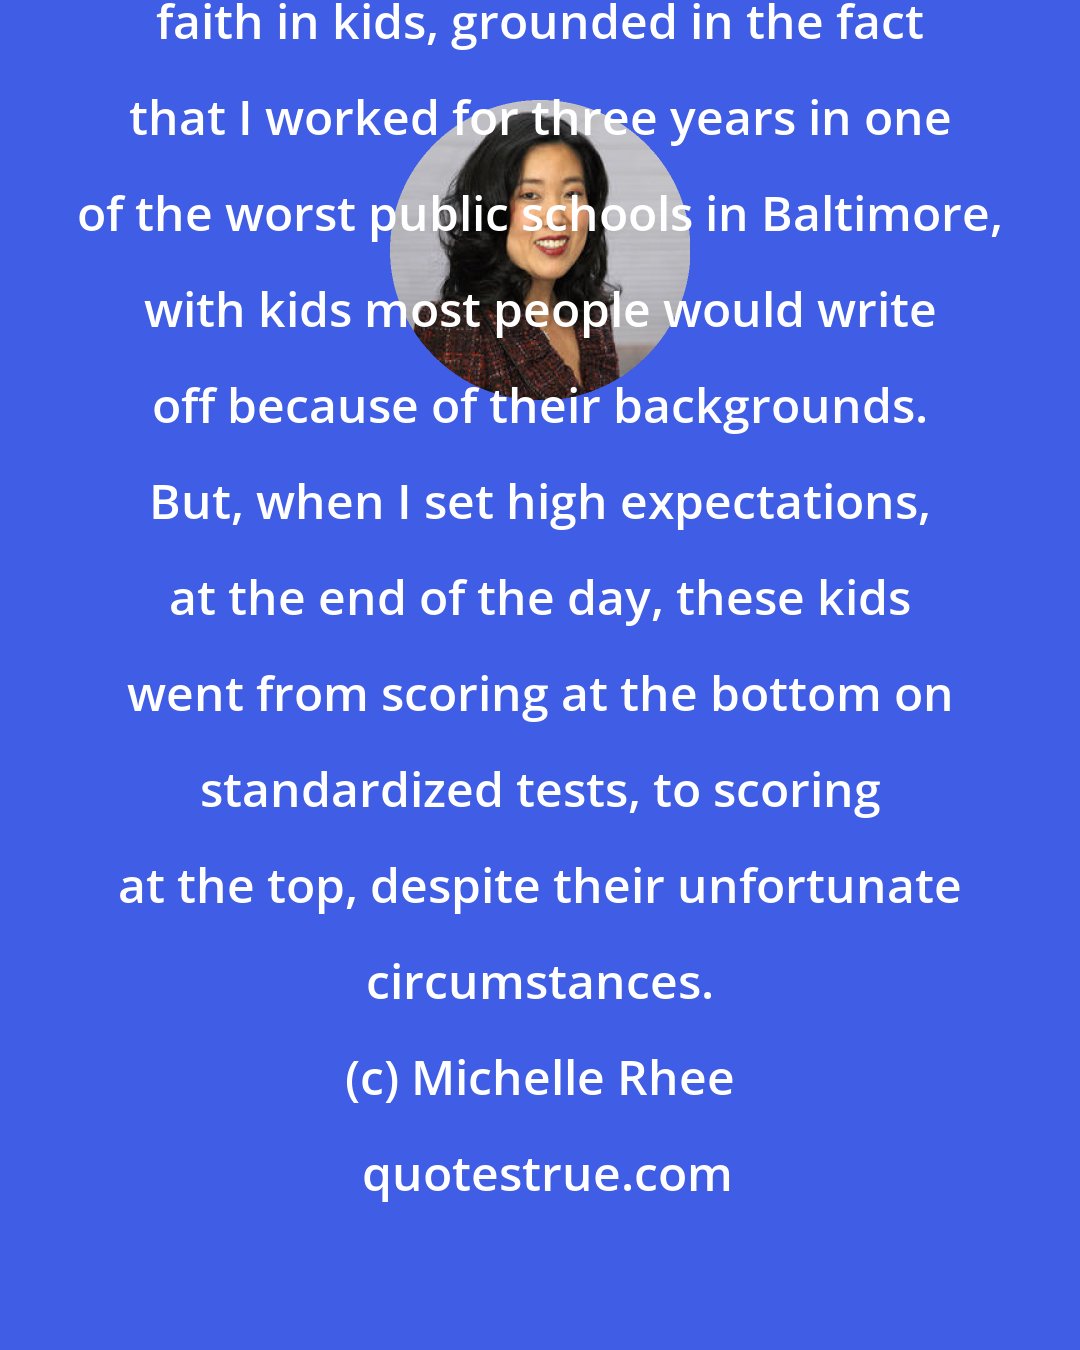 Michelle Rhee: I have an absolutely unshakable faith in kids, grounded in the fact that I worked for three years in one of the worst public schools in Baltimore, with kids most people would write off because of their backgrounds. But, when I set high expectations, at the end of the day, these kids went from scoring at the bottom on standardized tests, to scoring at the top, despite their unfortunate circumstances.